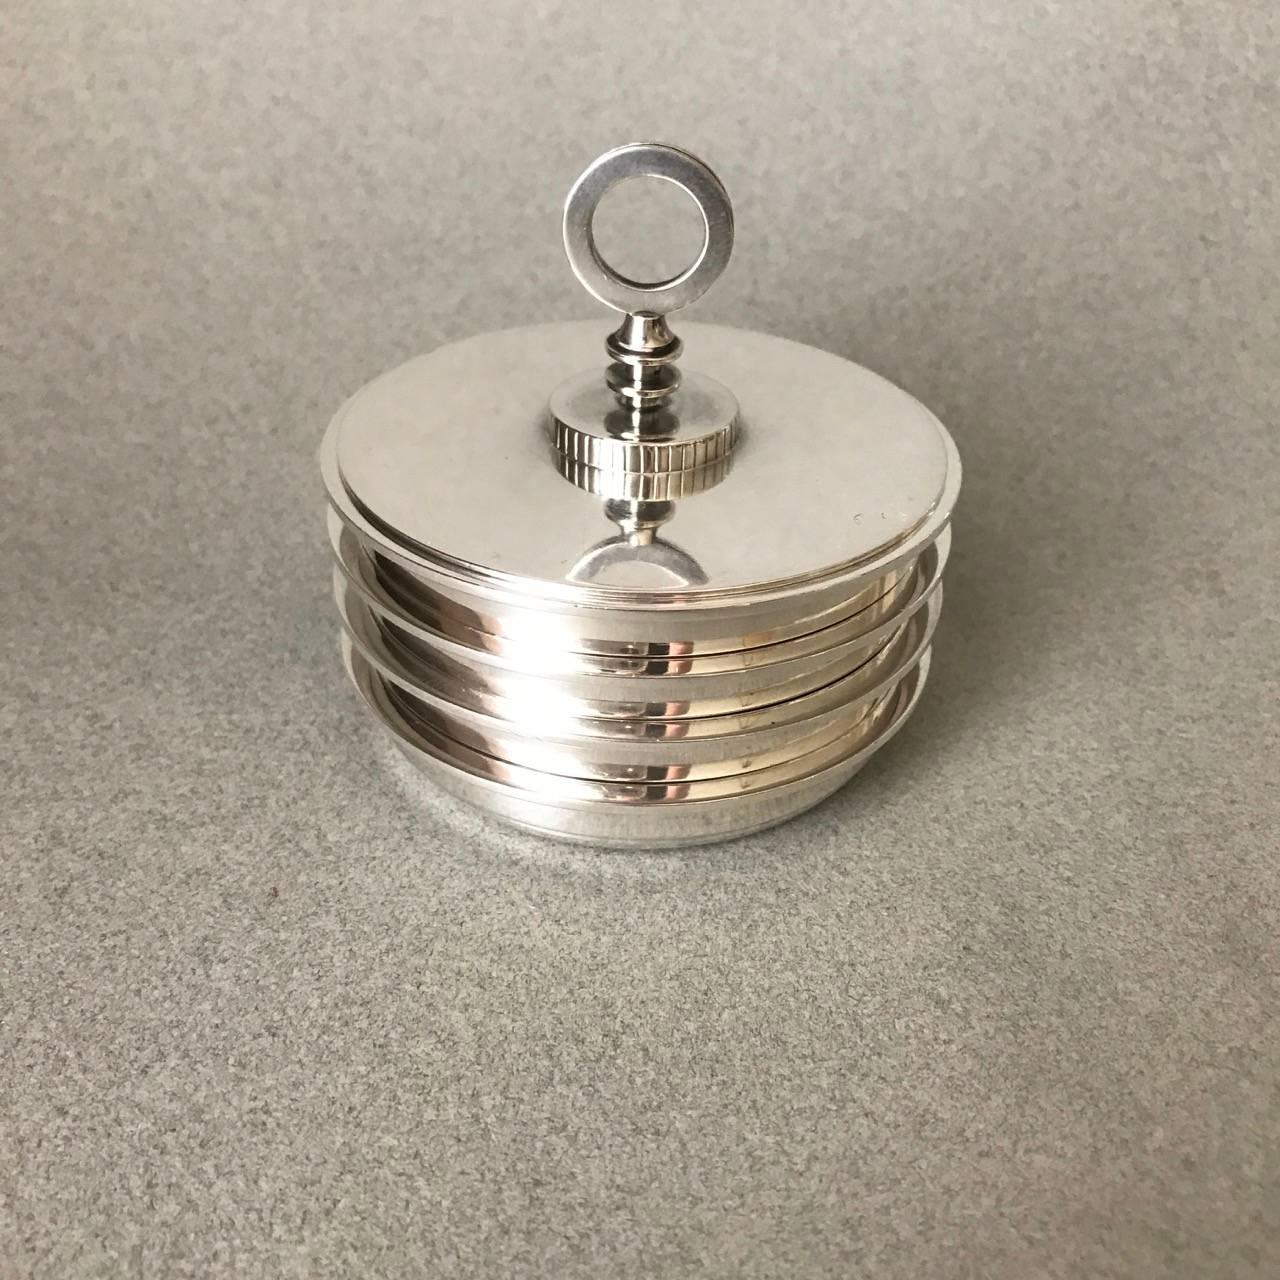 Georg Jensen sterling silver coaster set, no. 817.

Set of four stacking coasters with lid, designed by Sigvard Bernadotte. Very heavy, excellent condition. Measures 3" x 3"

Perfect for use as individual nut, condiment or olive